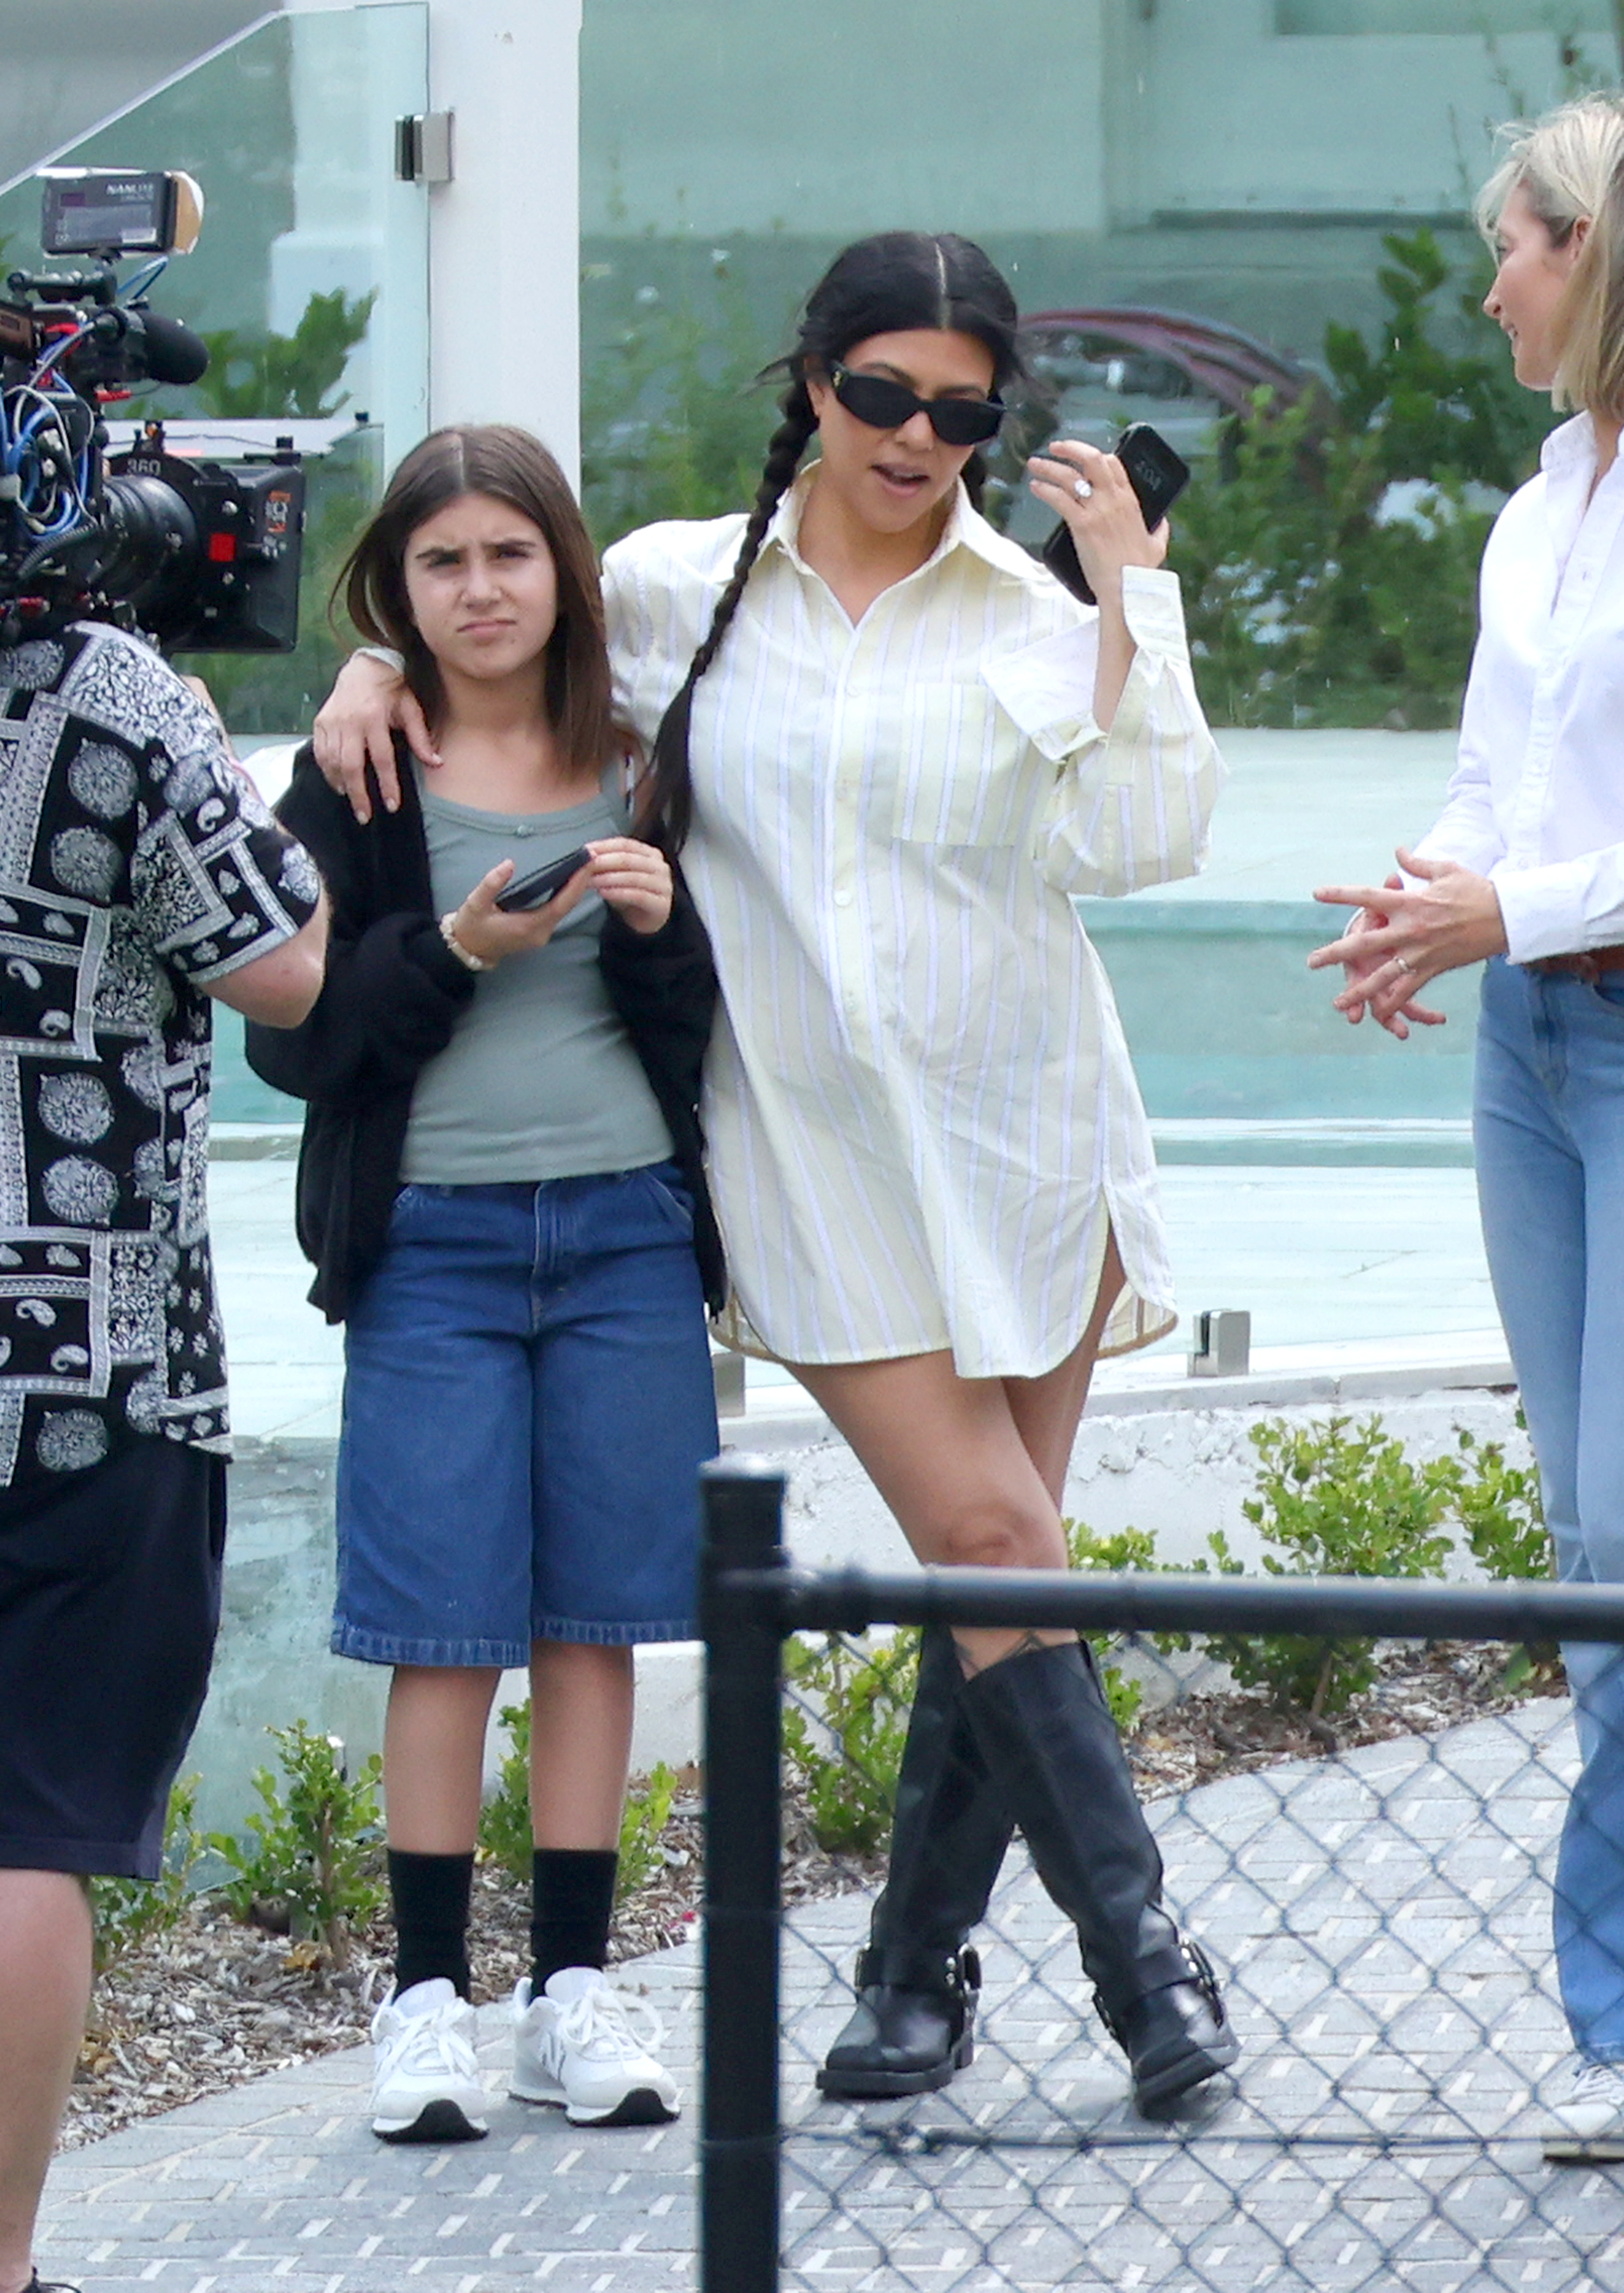 Earlier that day, Kourtney, Penelope, and Reign spent Valentine's Day feeding horses and playing tennis